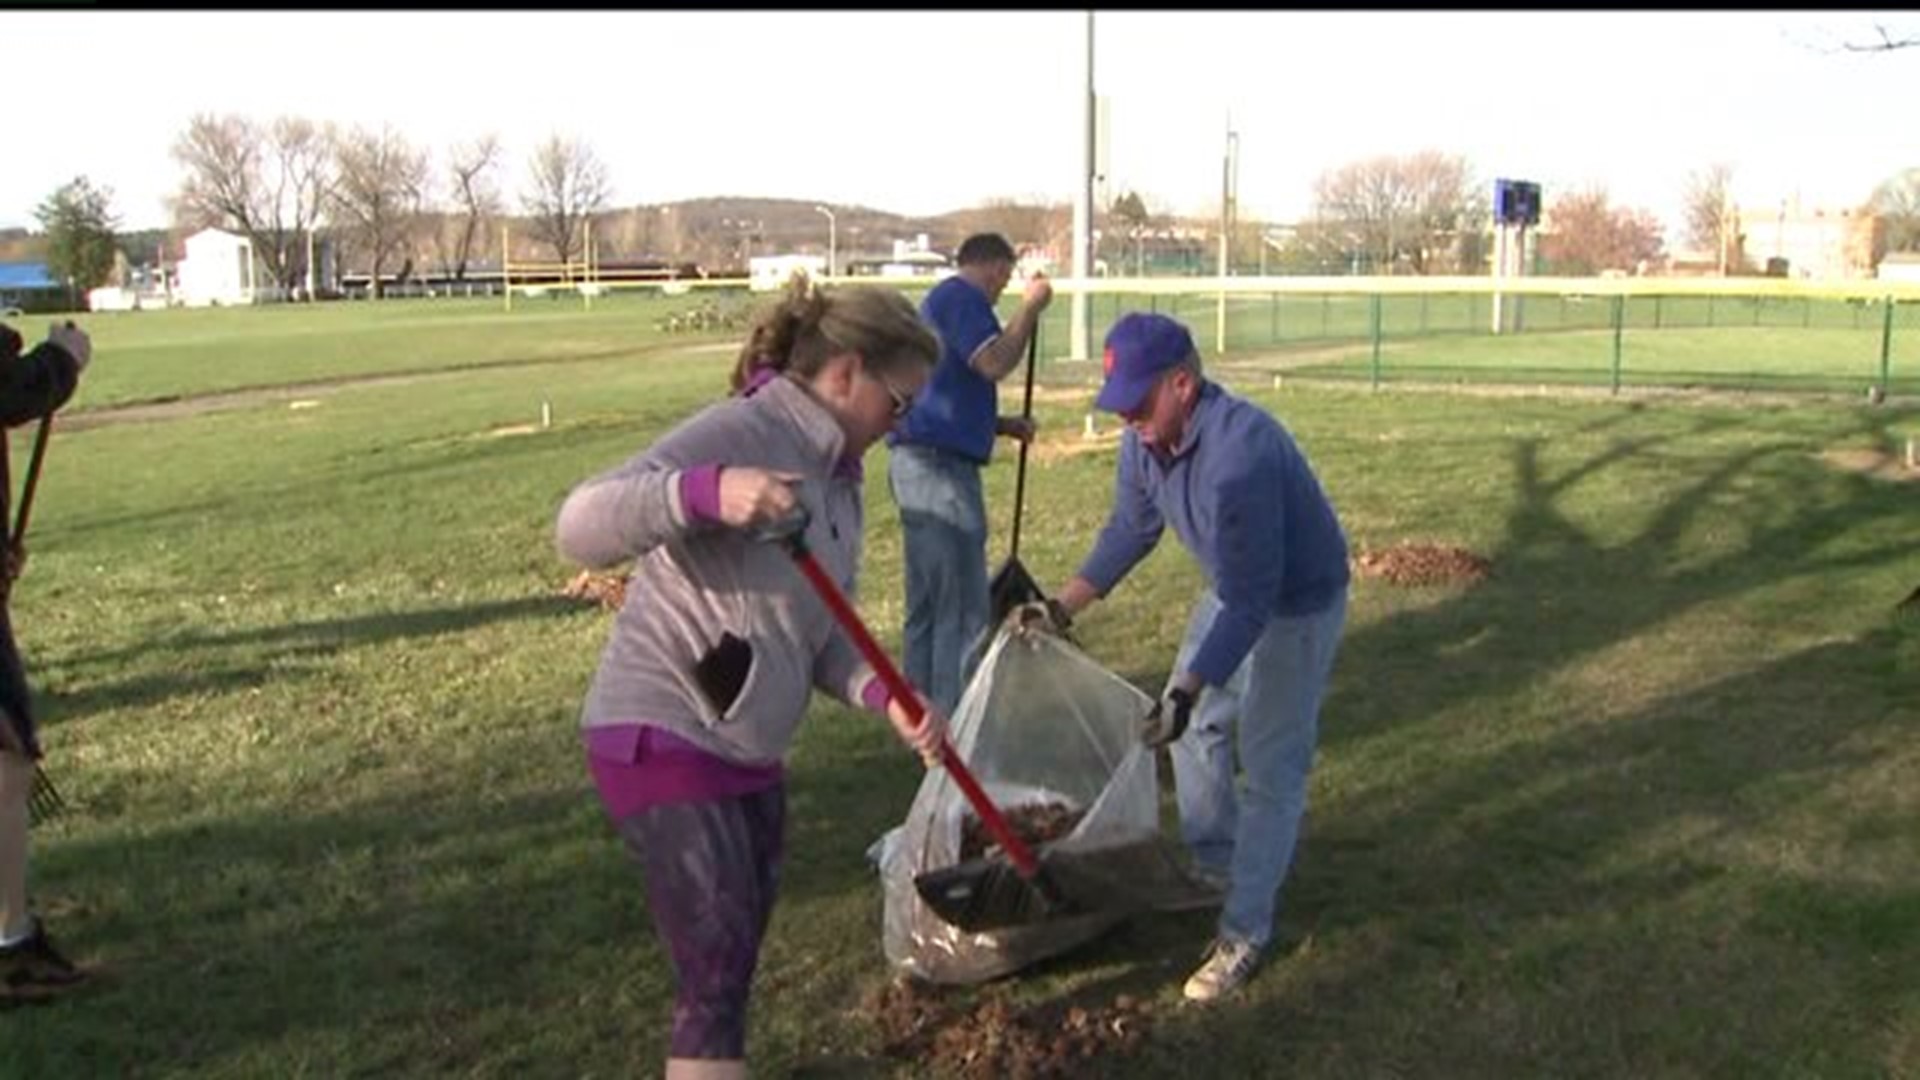 Rotary Club of York helps prepare Little League fields for opening day